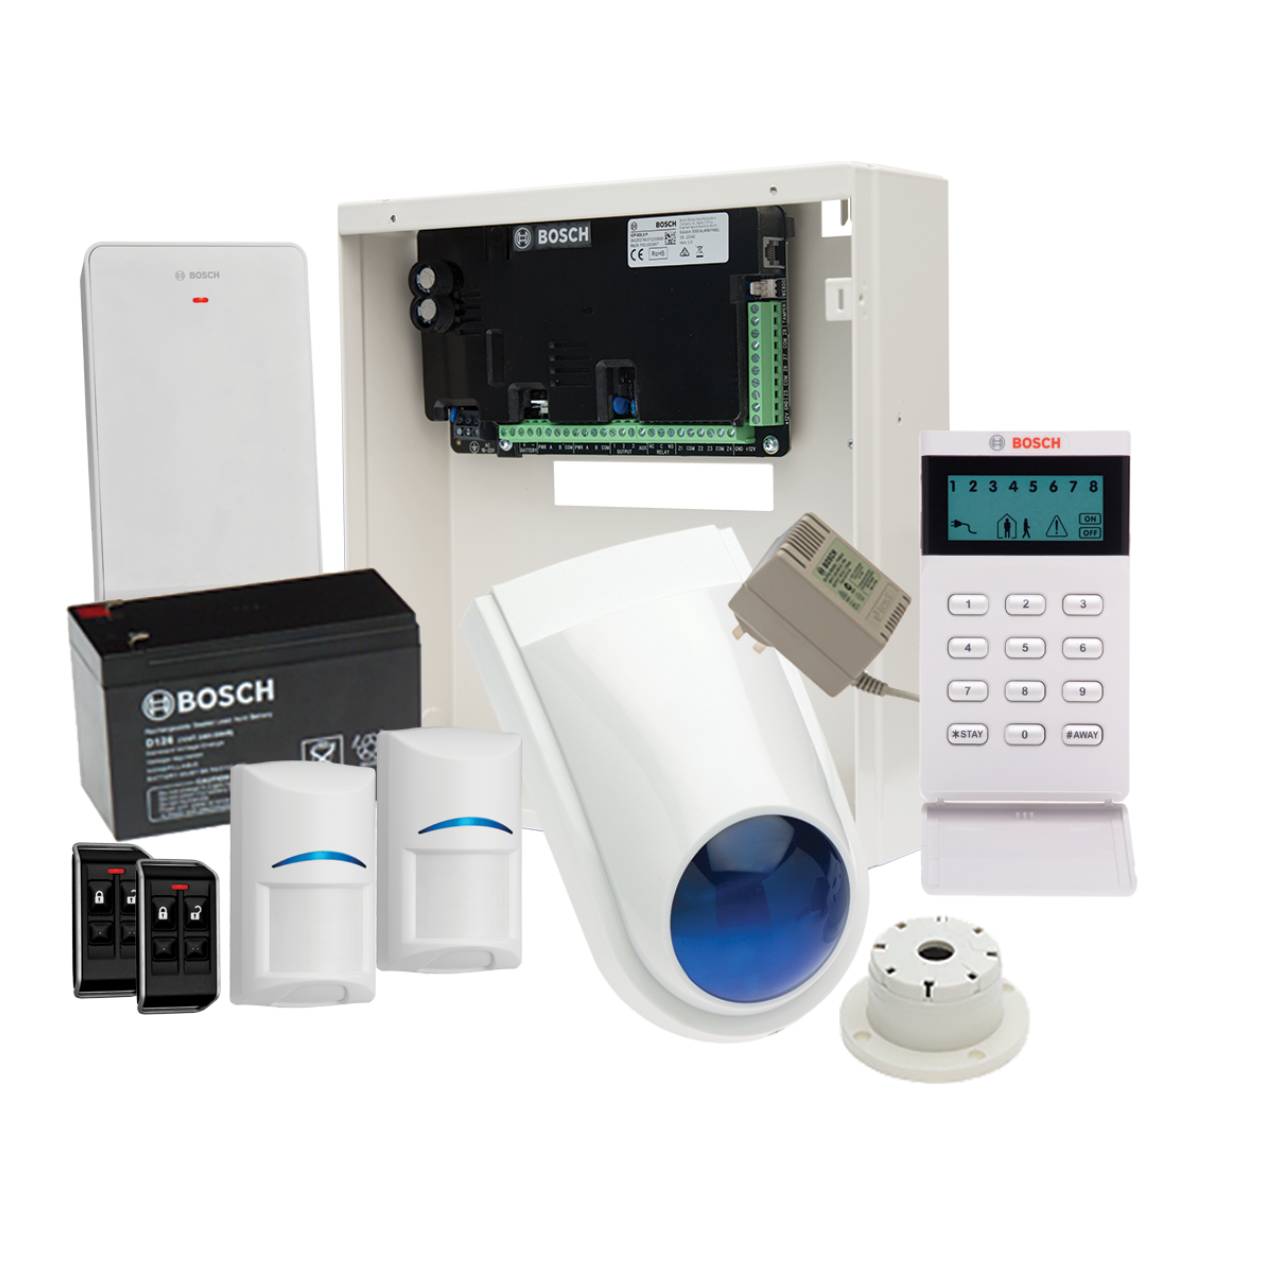 Bosch Solution 3000 Alarm System, Icon Code Pad, Wireless Detector Kit-Bosch-CTC Security